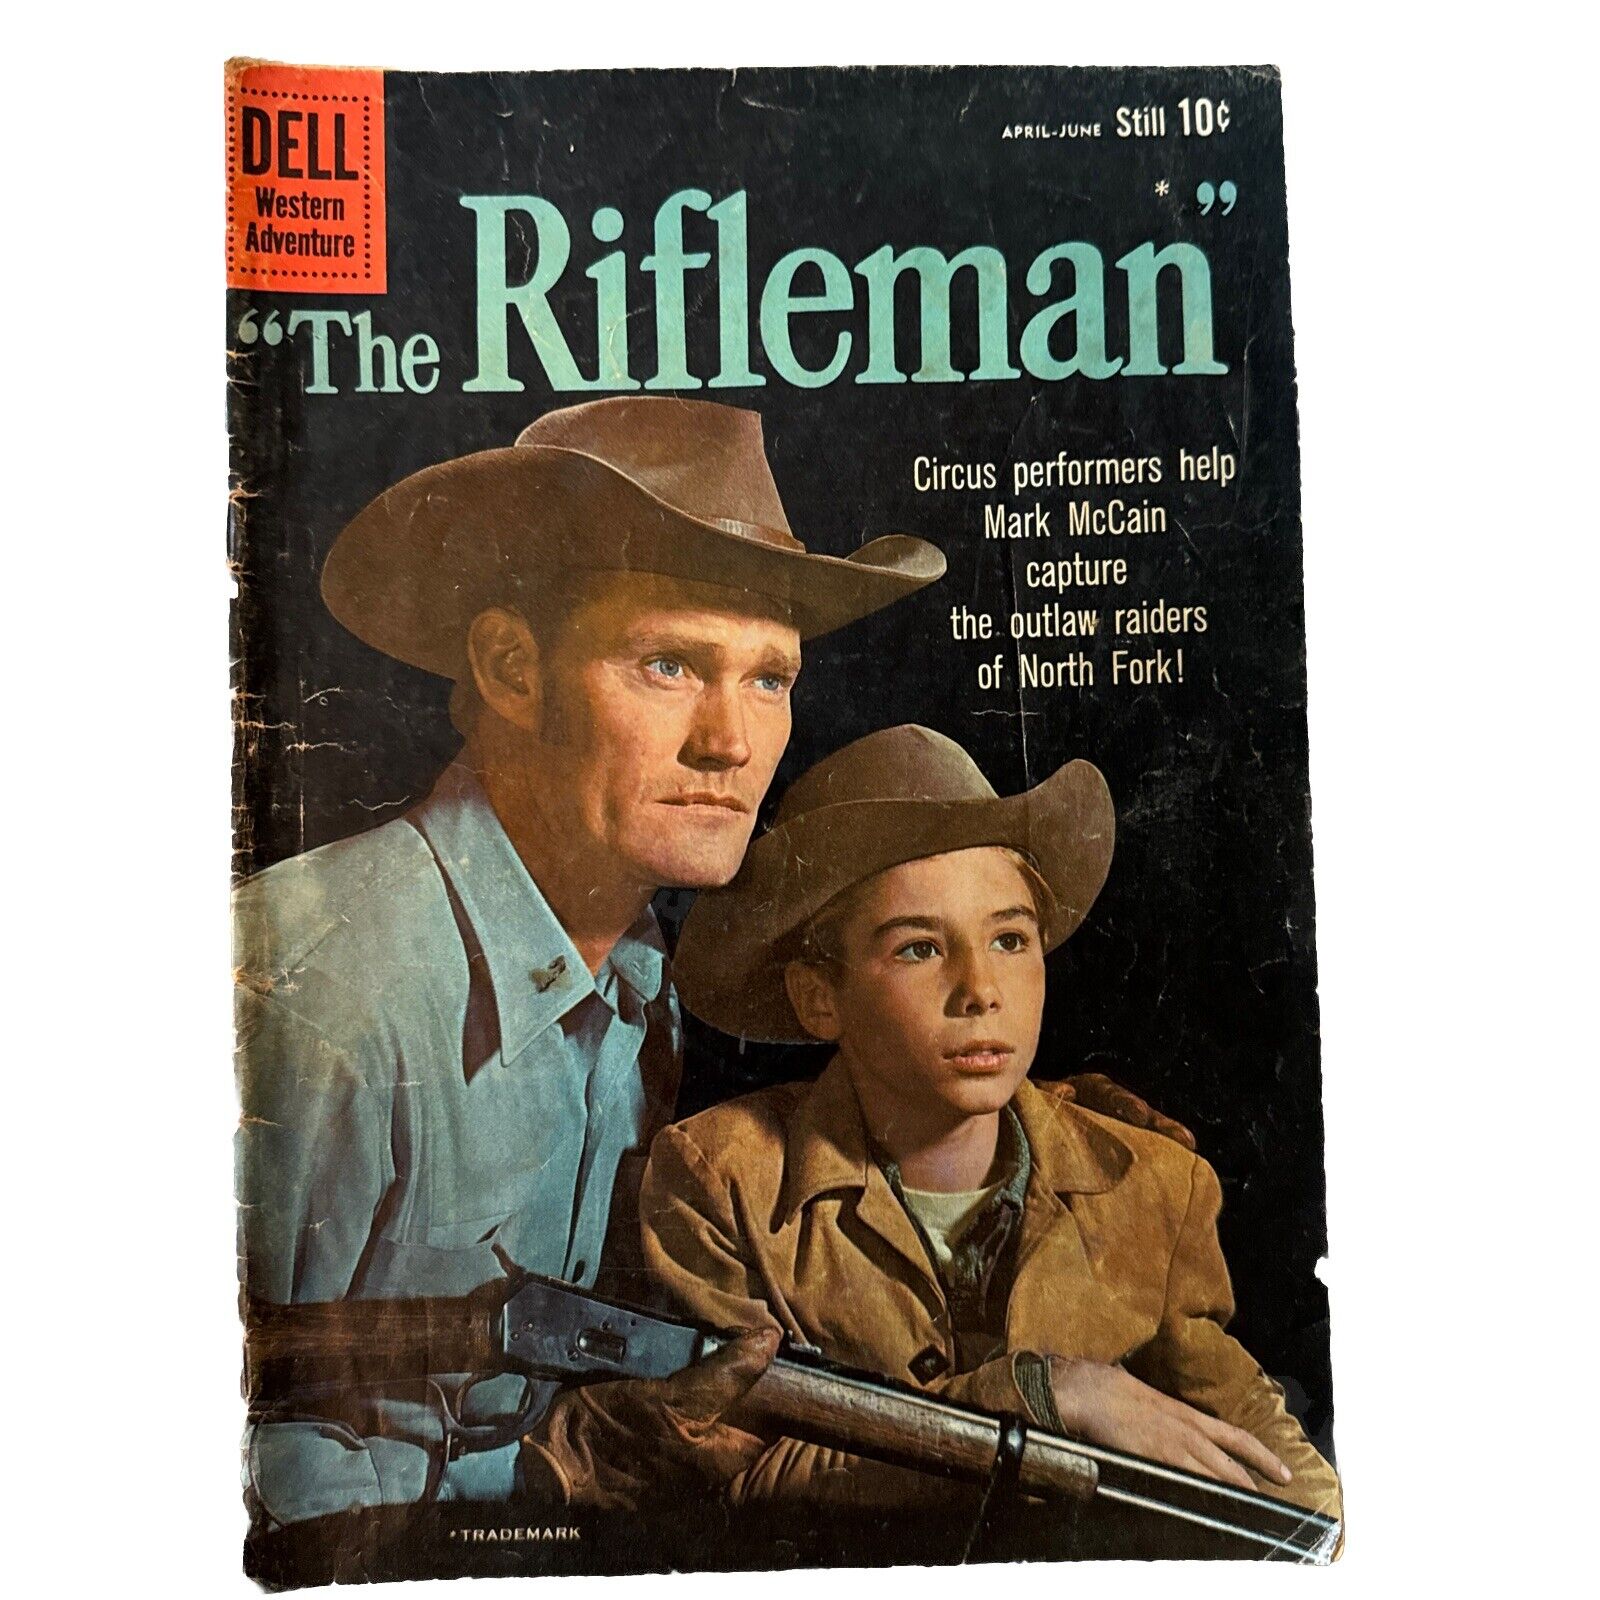 The Rifleman # 2 Vintage 1960 Dell Comic 10 Cent Cover Price